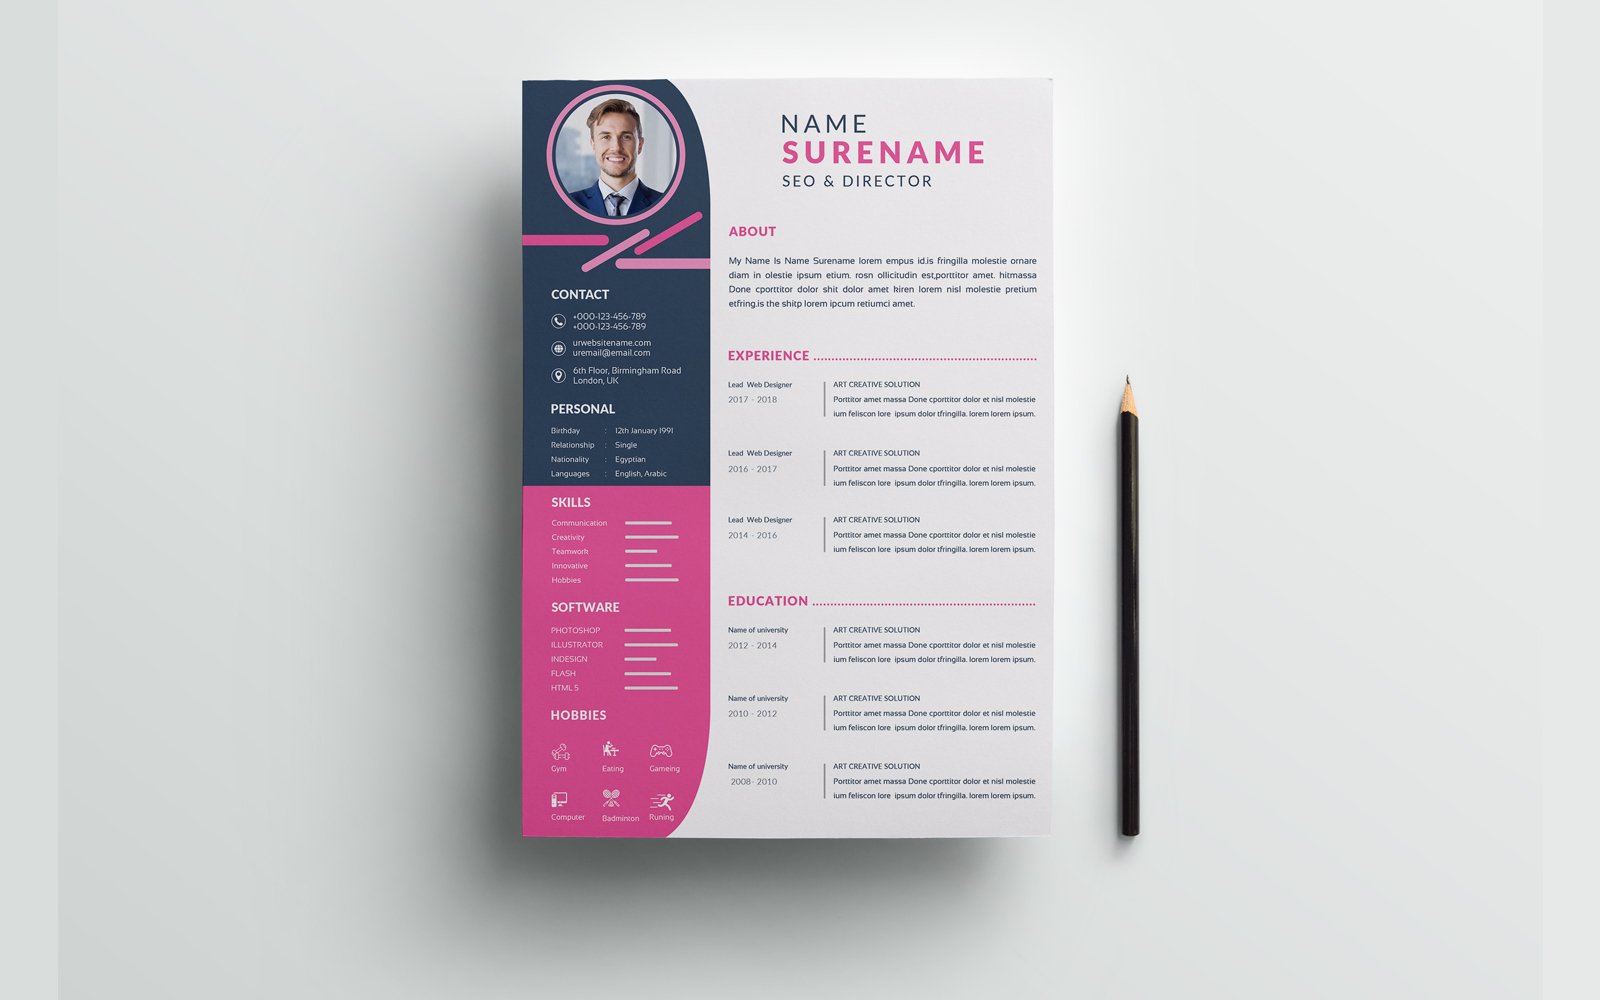 Template #374740 Resume Resume Webdesign Template - Logo template Preview